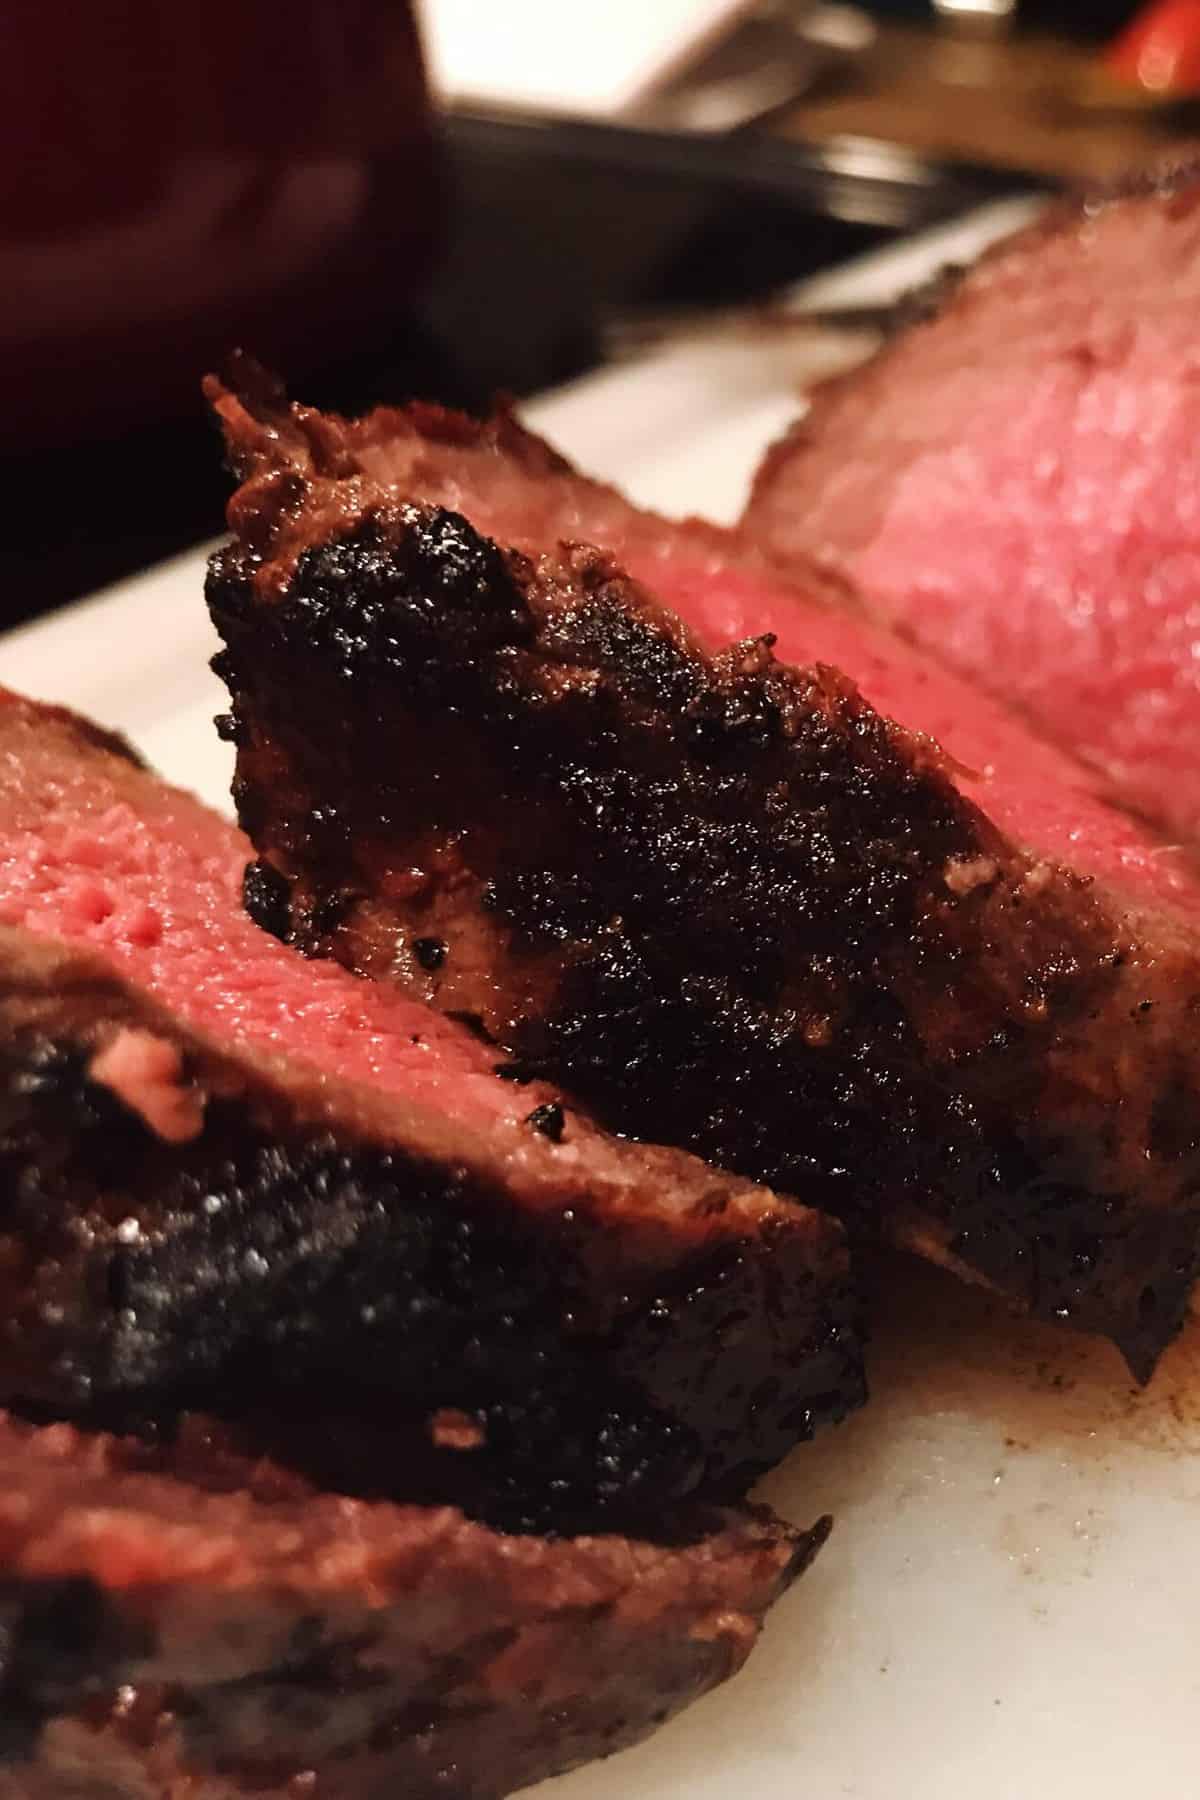  Who needs steak when you can have perfectly grilled venison?